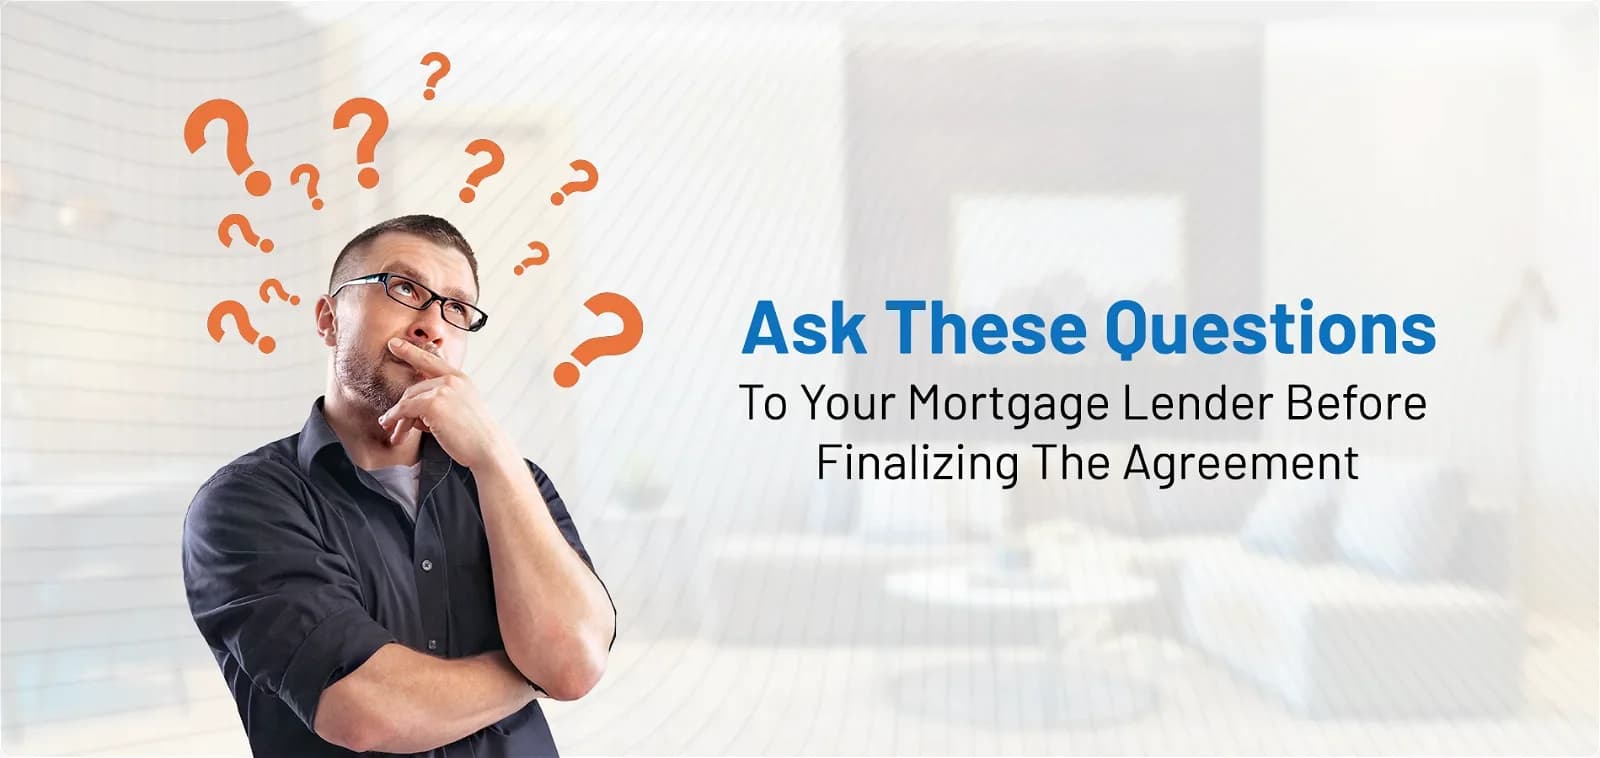 Top Questions to Ask Your Mortgage Lender Before Finalizing Home Loan Agreement